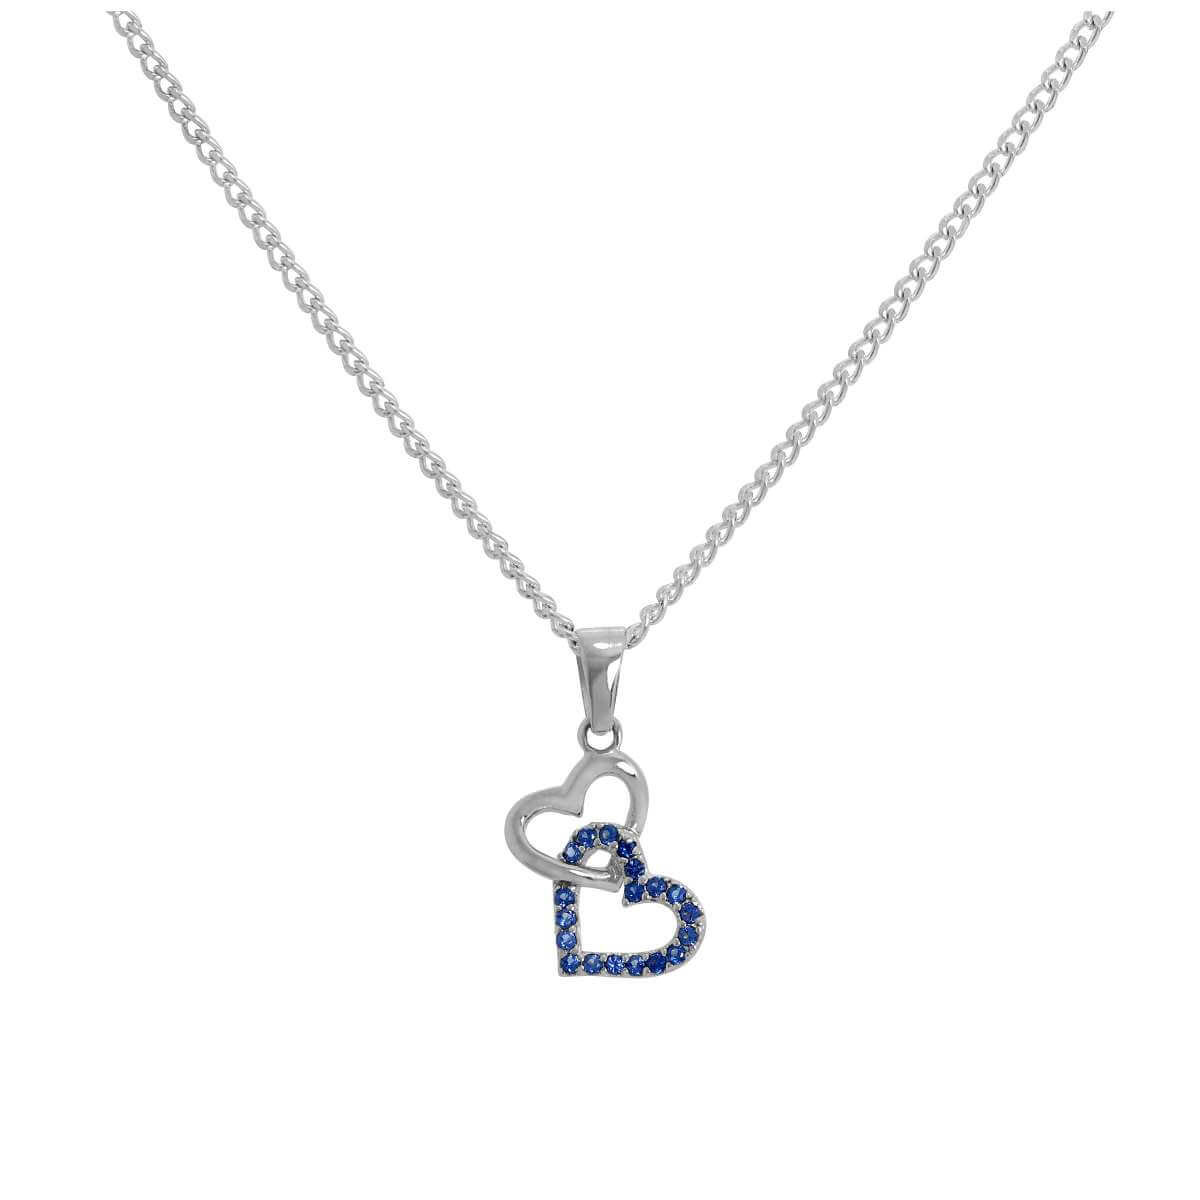 Sterling Silver & Blue CZ Crystal Entwined Hearts Pendant on Chain 16 - 24 Inches